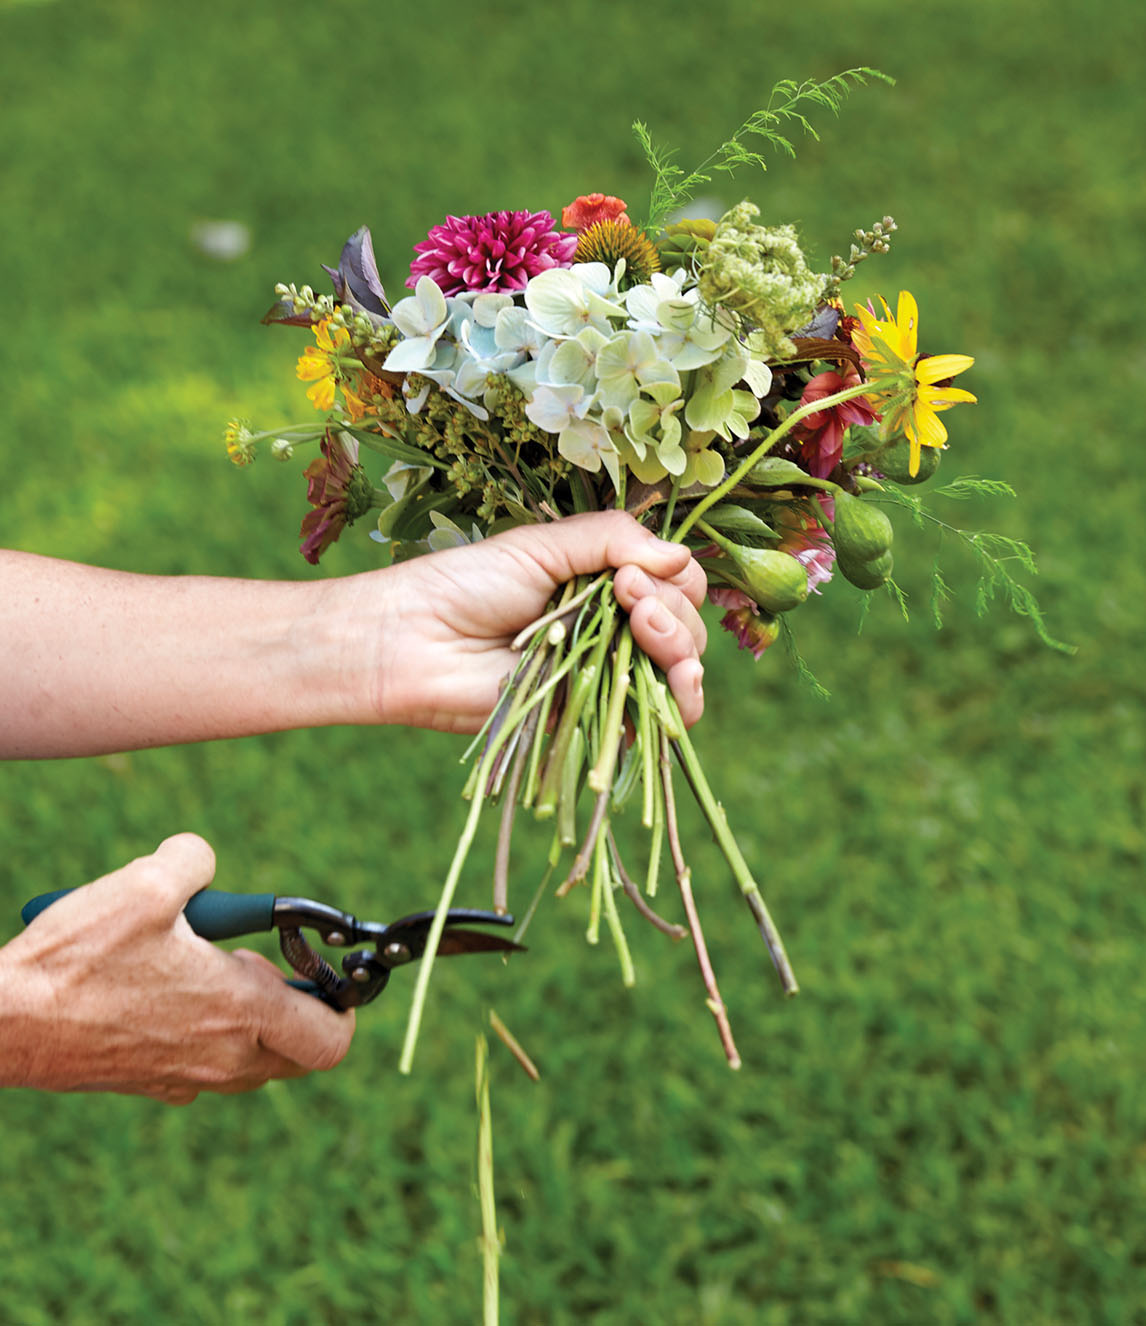 Kappi Naftel uses clippers to trim bouquet stems